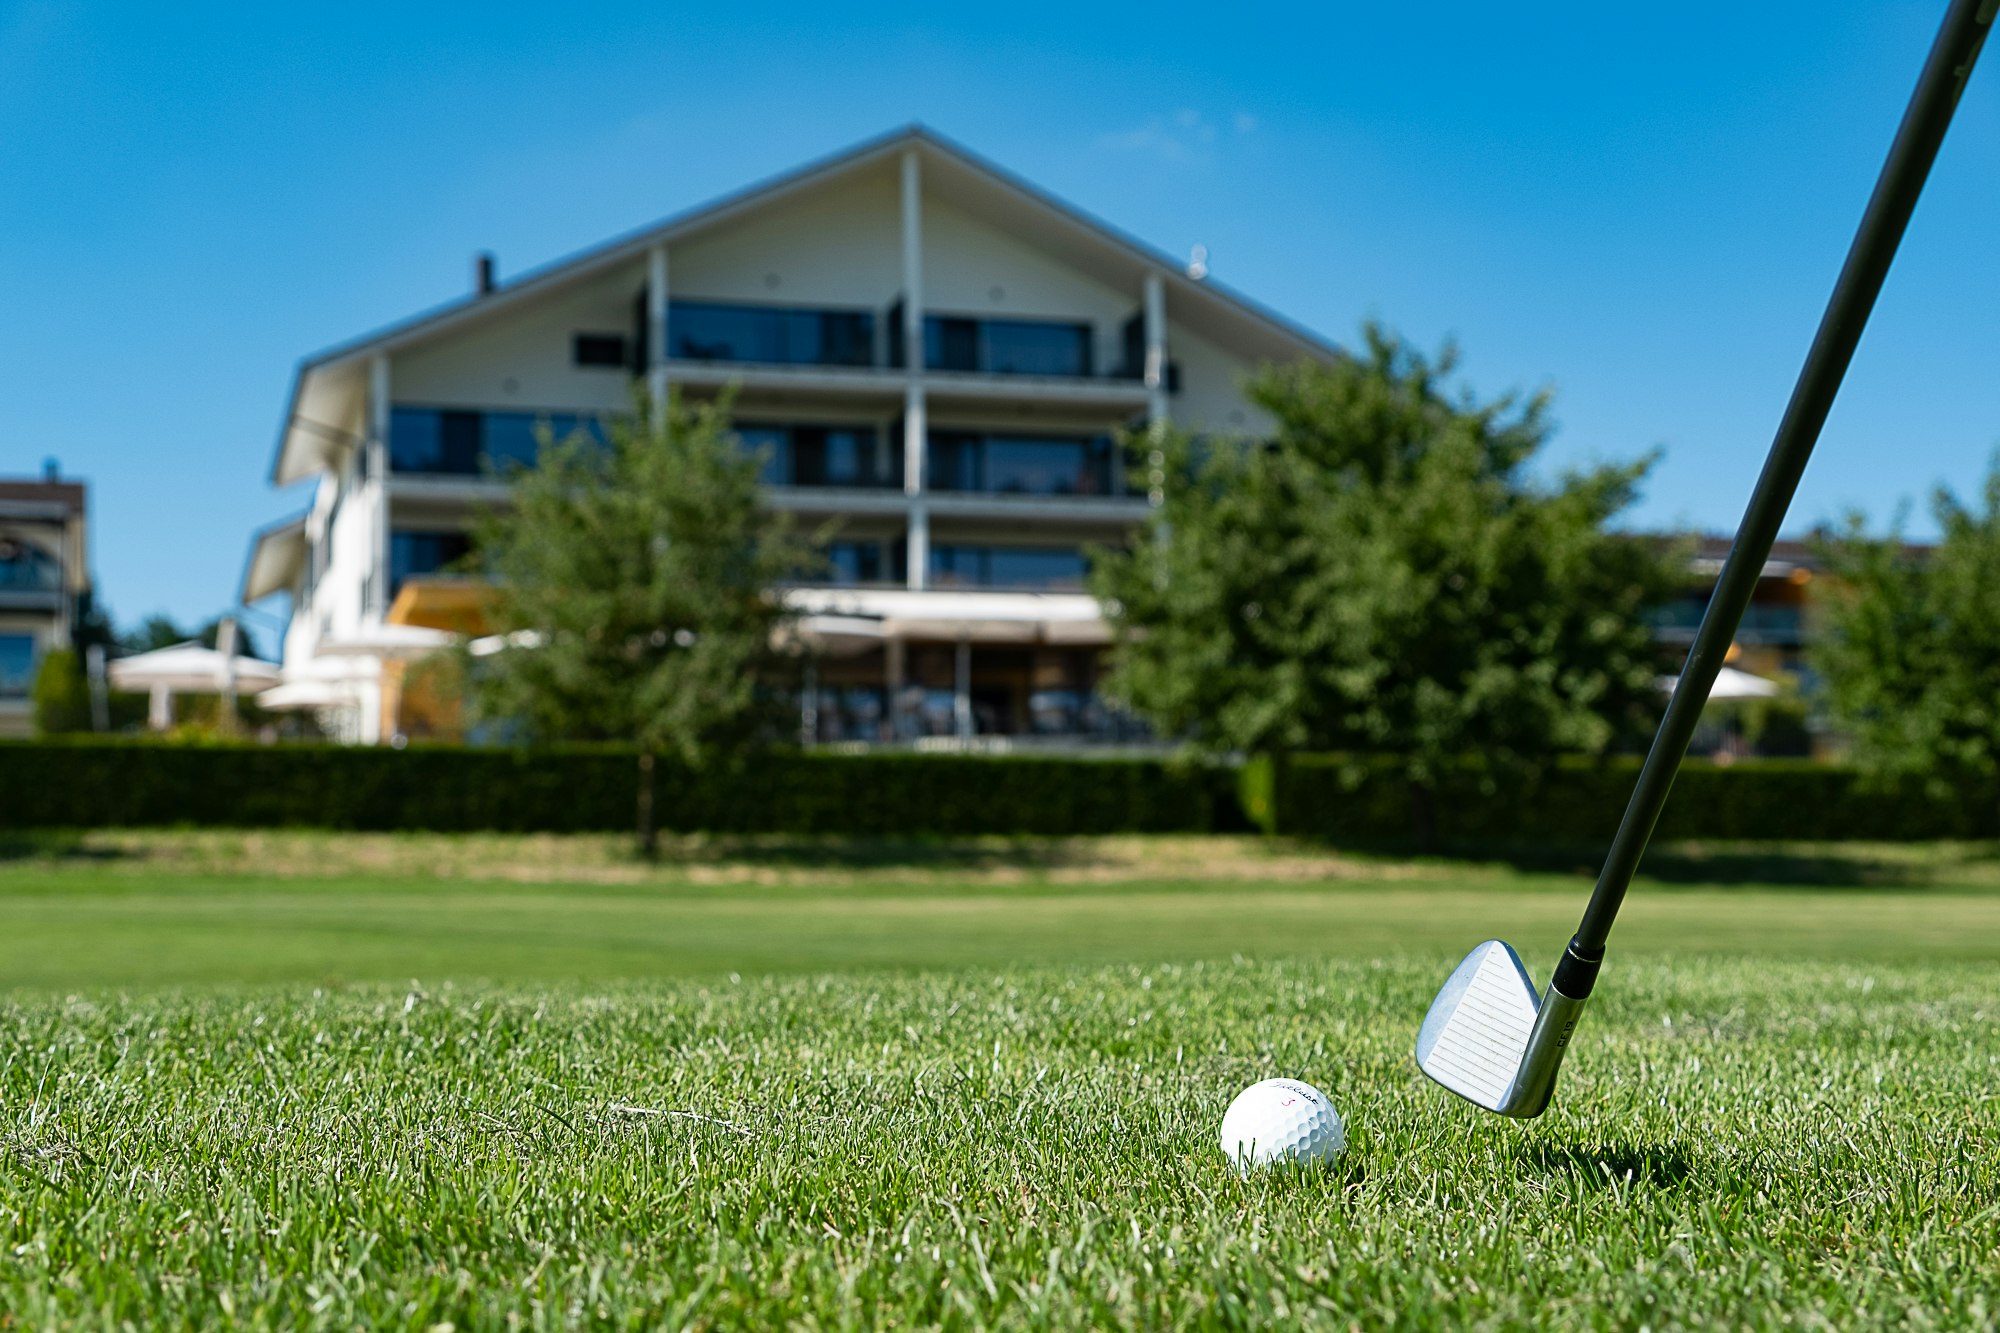 Golf & Relax
Overnight package